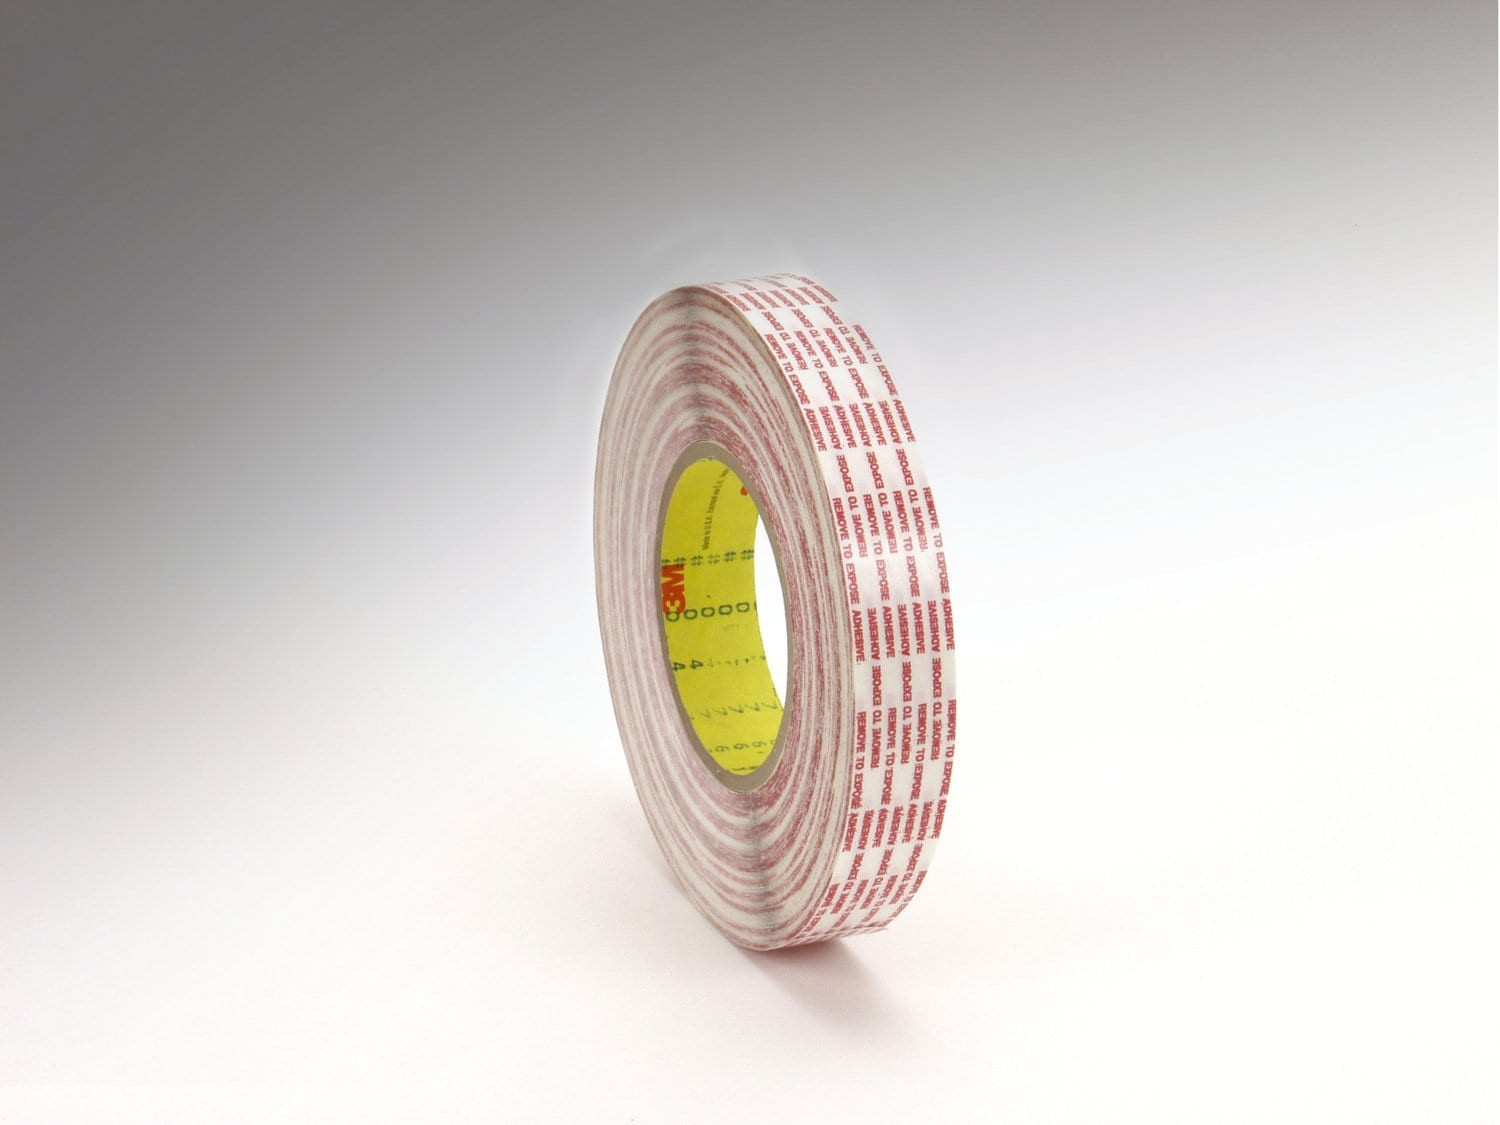 7000048730 - 3M Double Coated Tape Extended Liner 476XL, Translucent, 1 in x 540 yd,
6 mil, 6 rolls per case